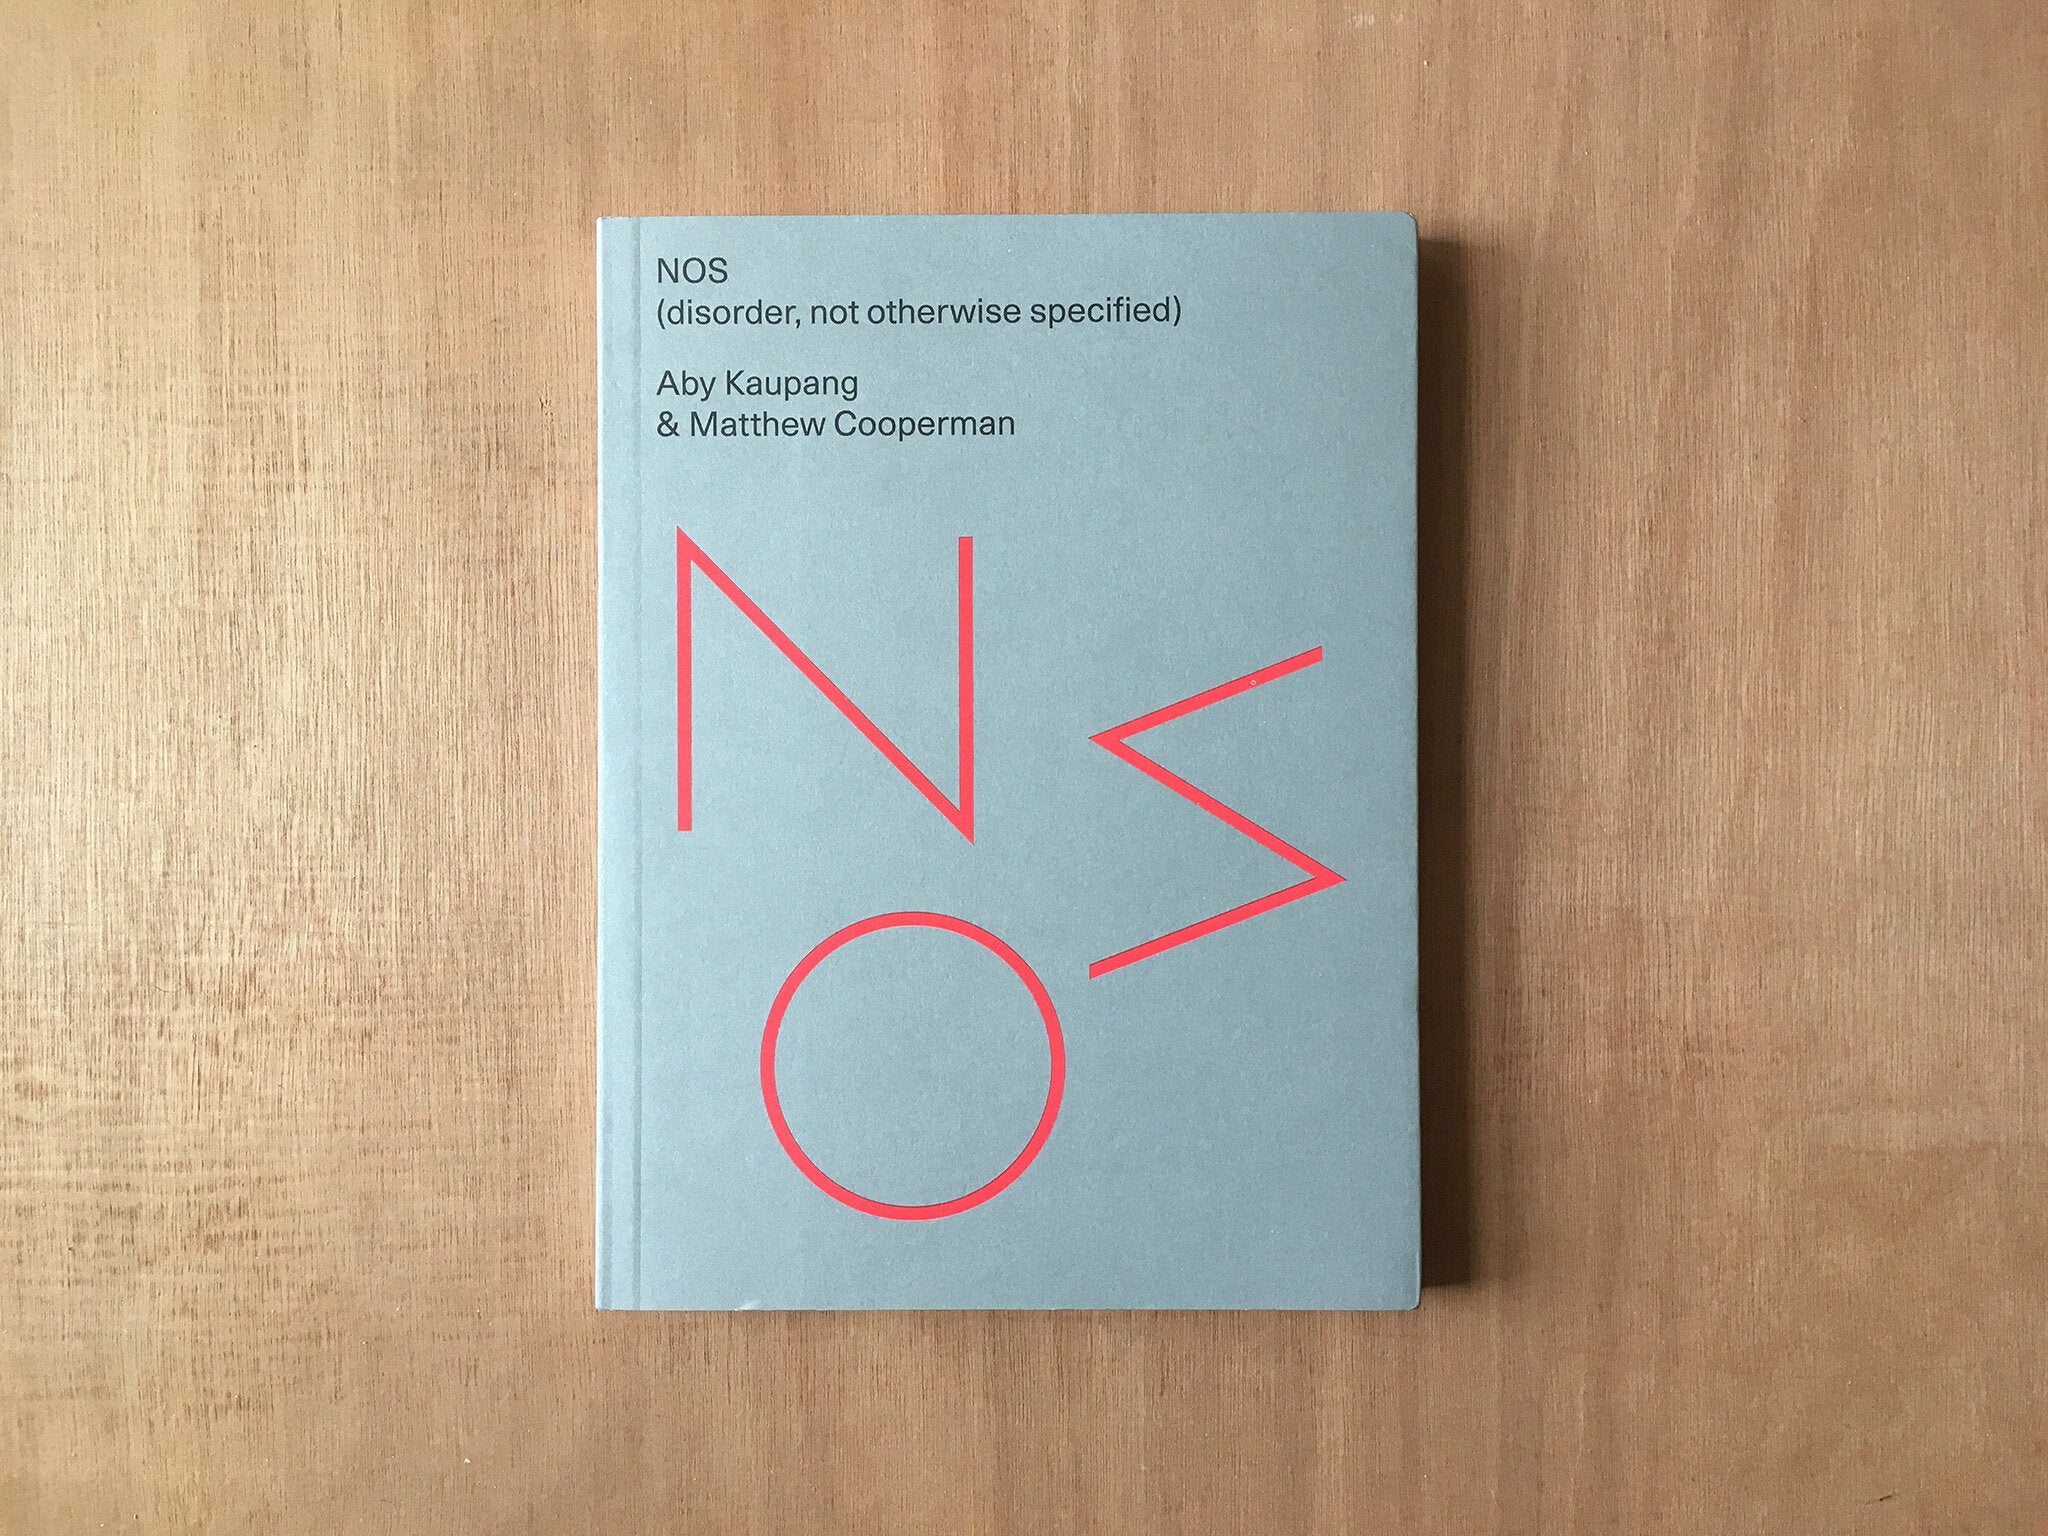 NOS (DISORDER, NOT OTHERWISE SPECIFIED) by Aby Kaupang and Matthew Cooperman